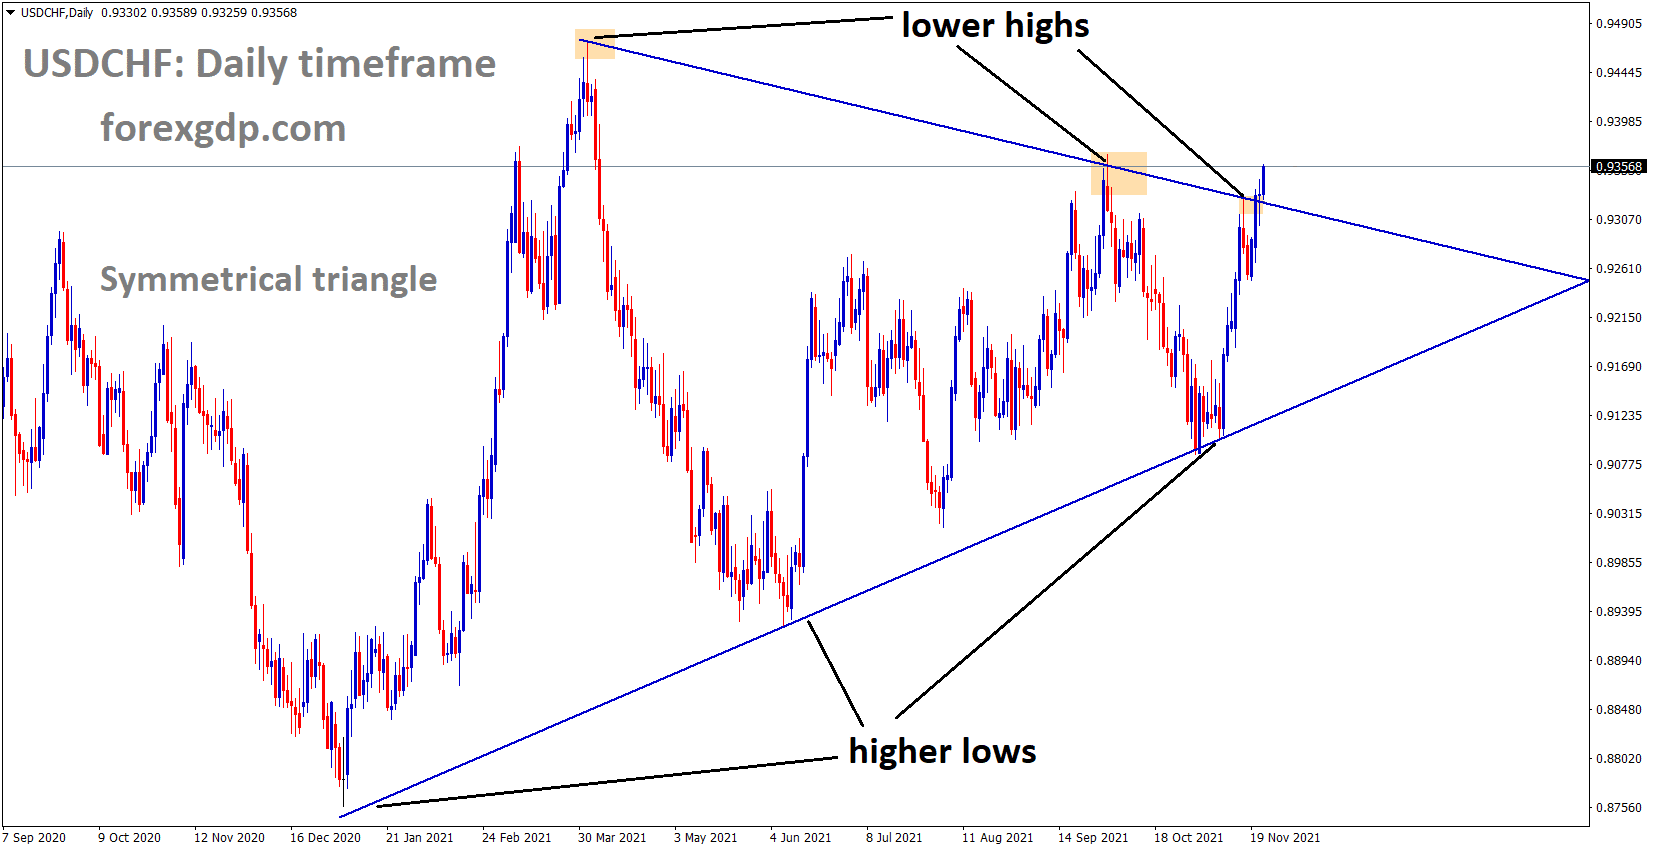 USDCHF has reached near to the previous high of the Symmetrical triangle pattern